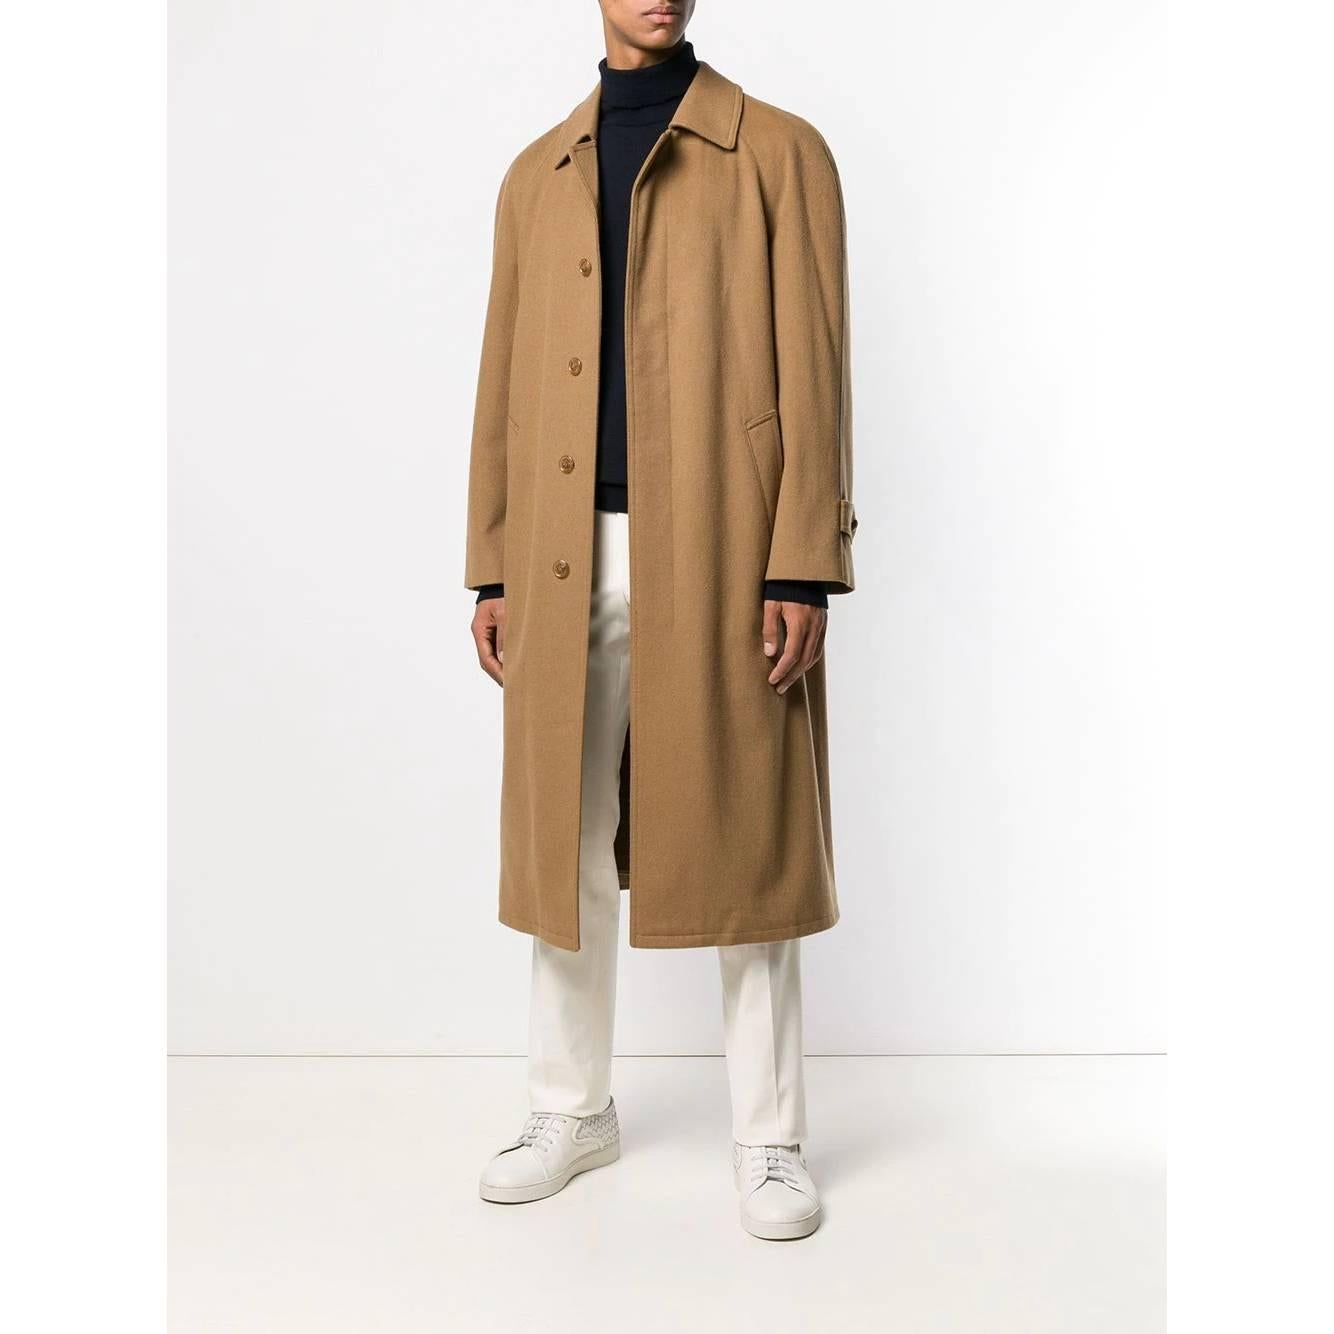 Salko loden beige wool coat. English front closure with buttons, two pockets and an internal pocket with zip, classic collar, cannon pleat on the back. Removable inner lining in red and white checked wool fabric.

This item belongs to an original